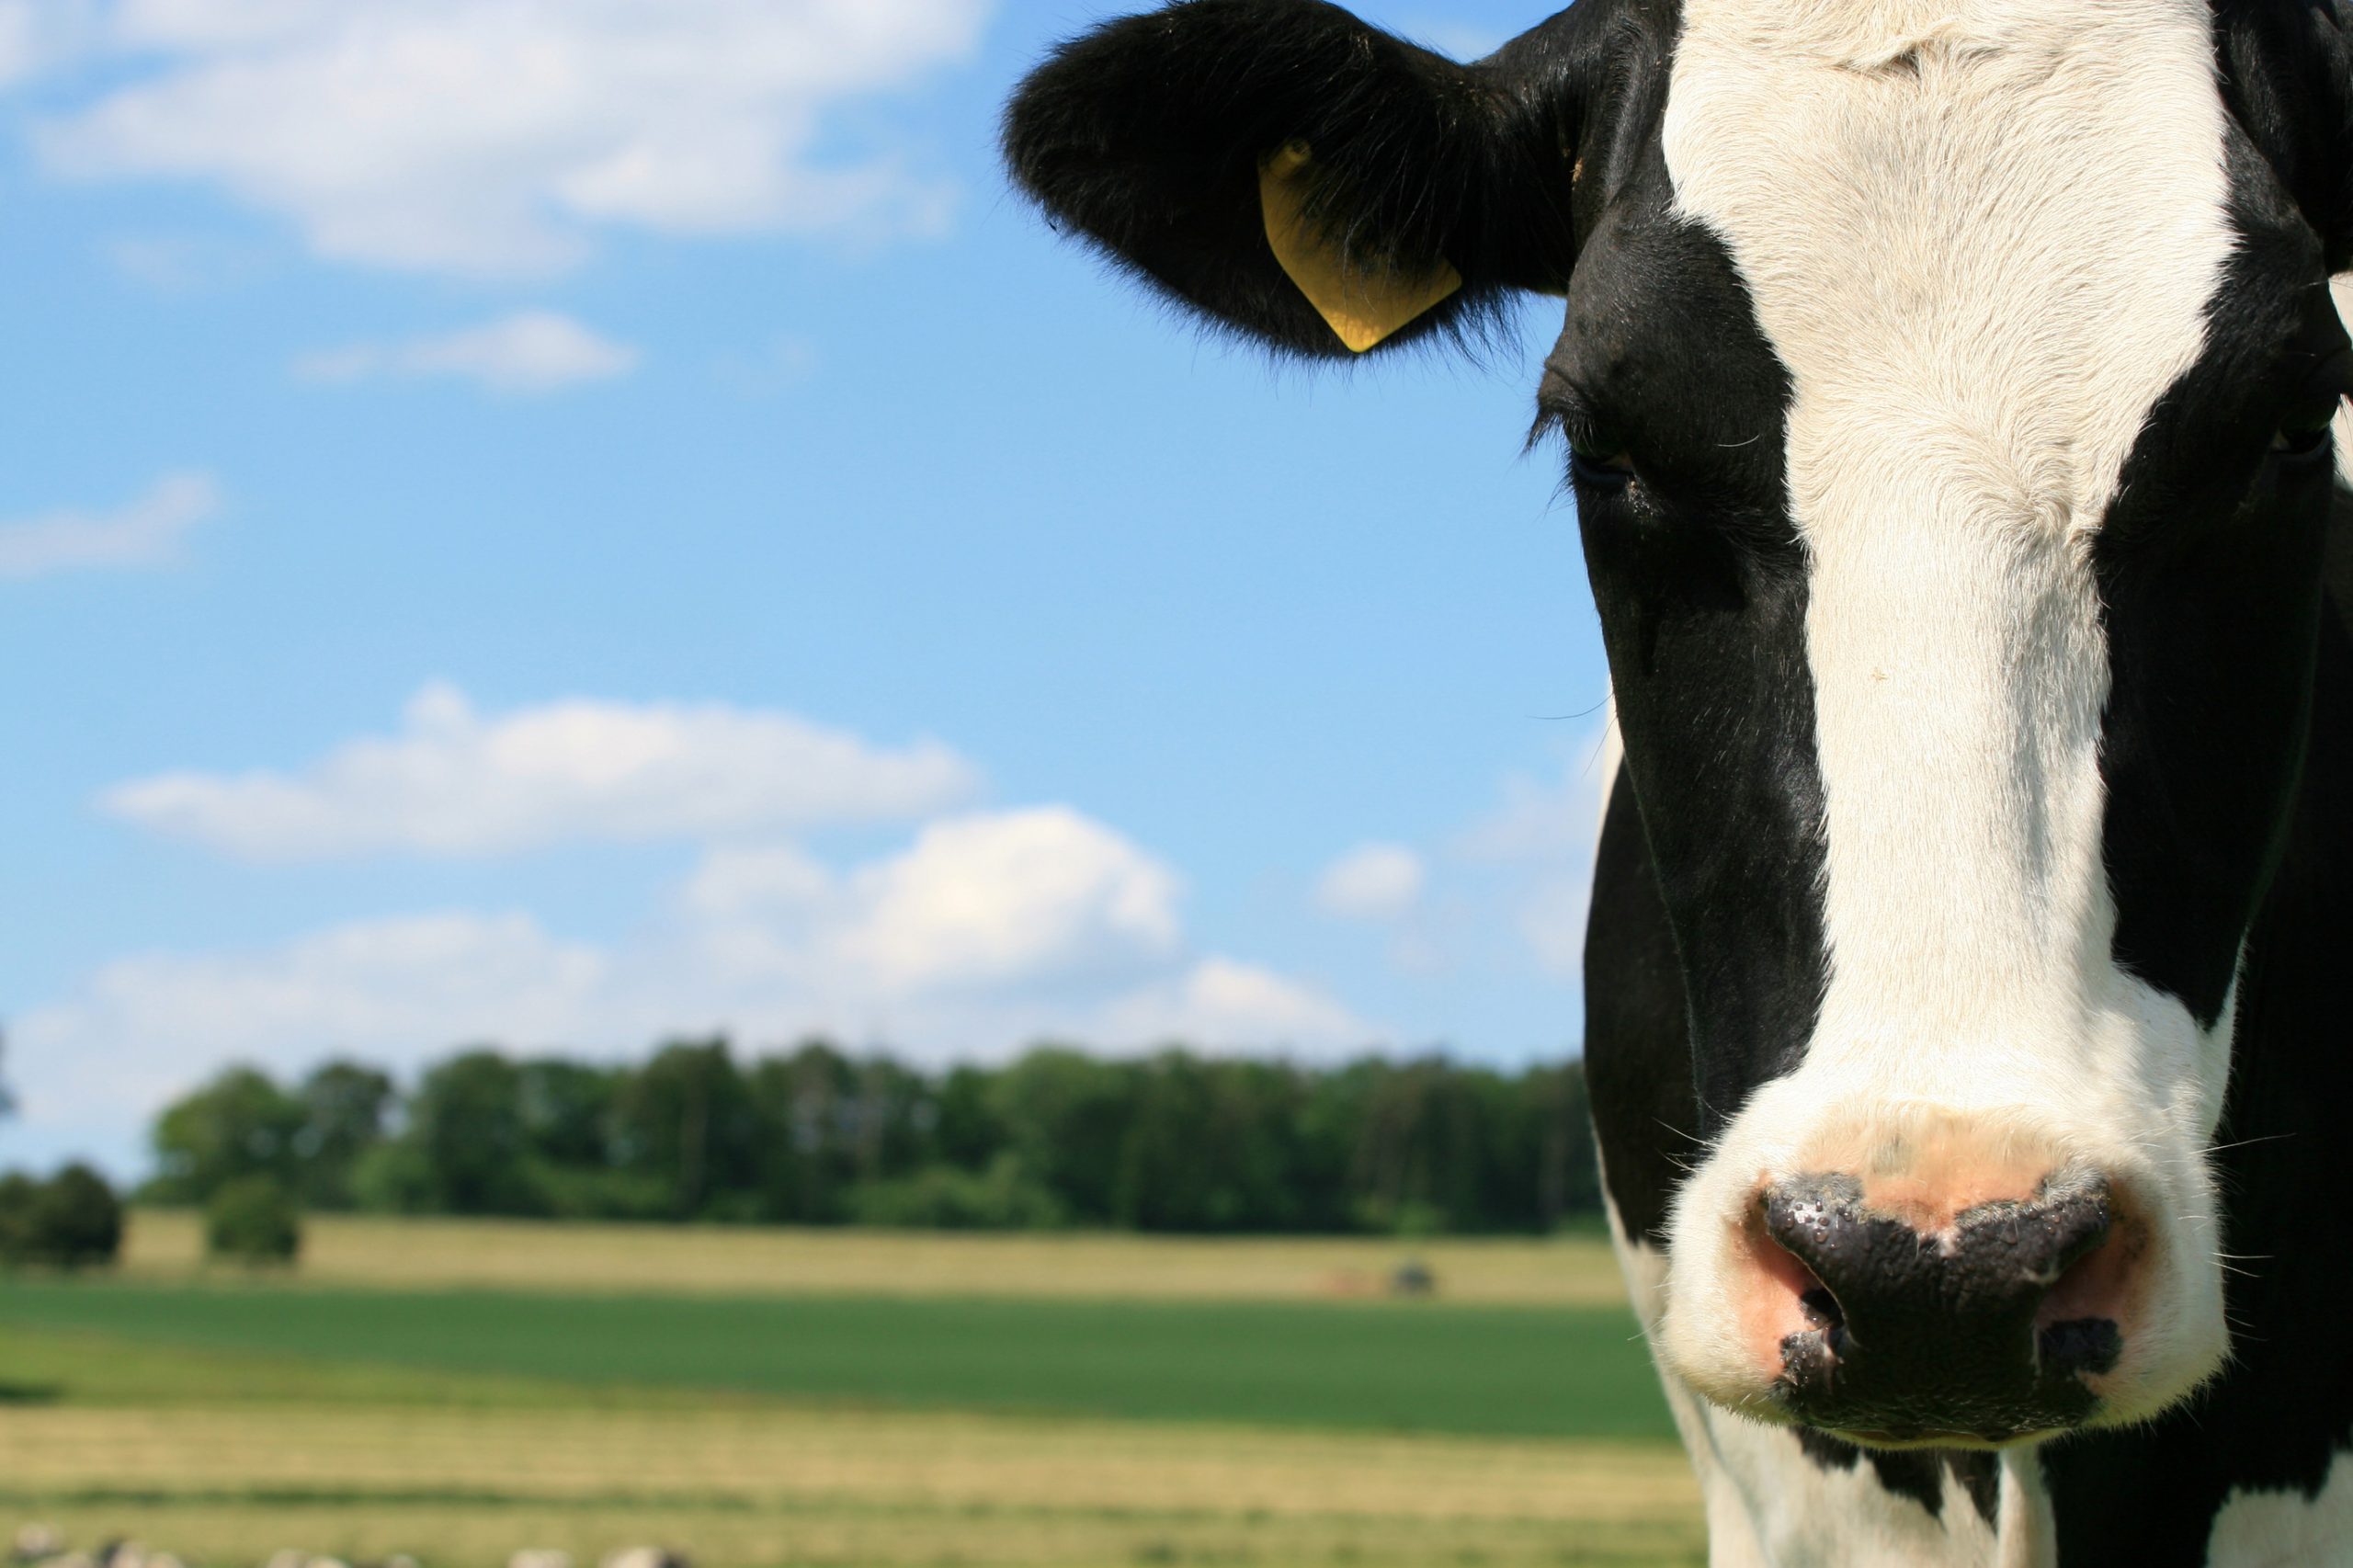 Natural dairy product launched in Europe